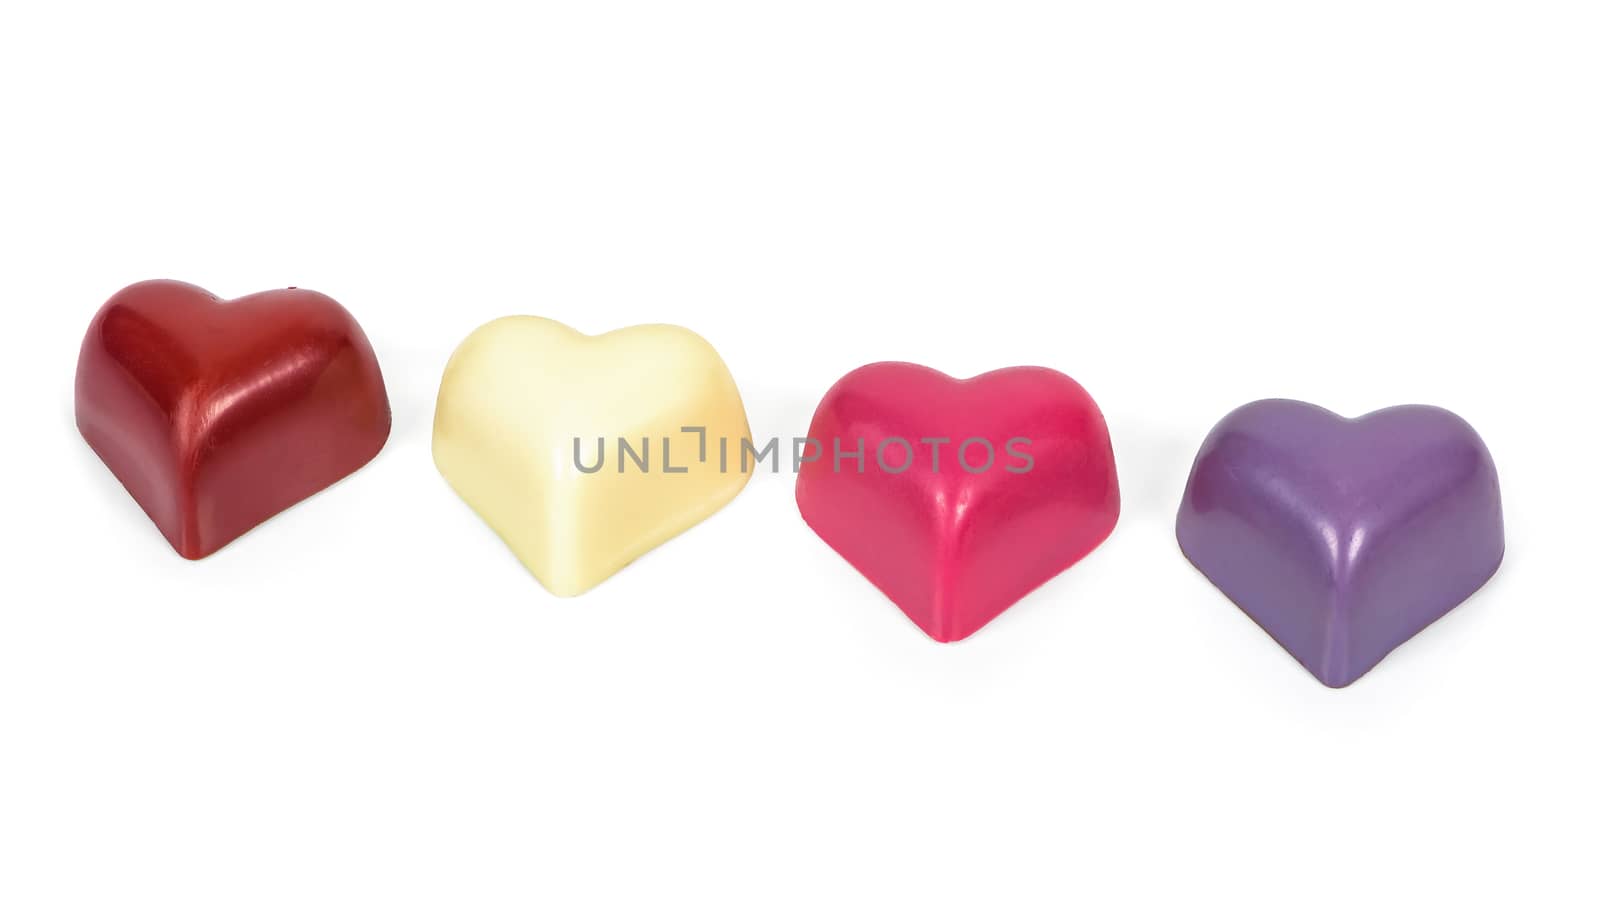 Colorful heart shaped chocolates on white background by mkos83